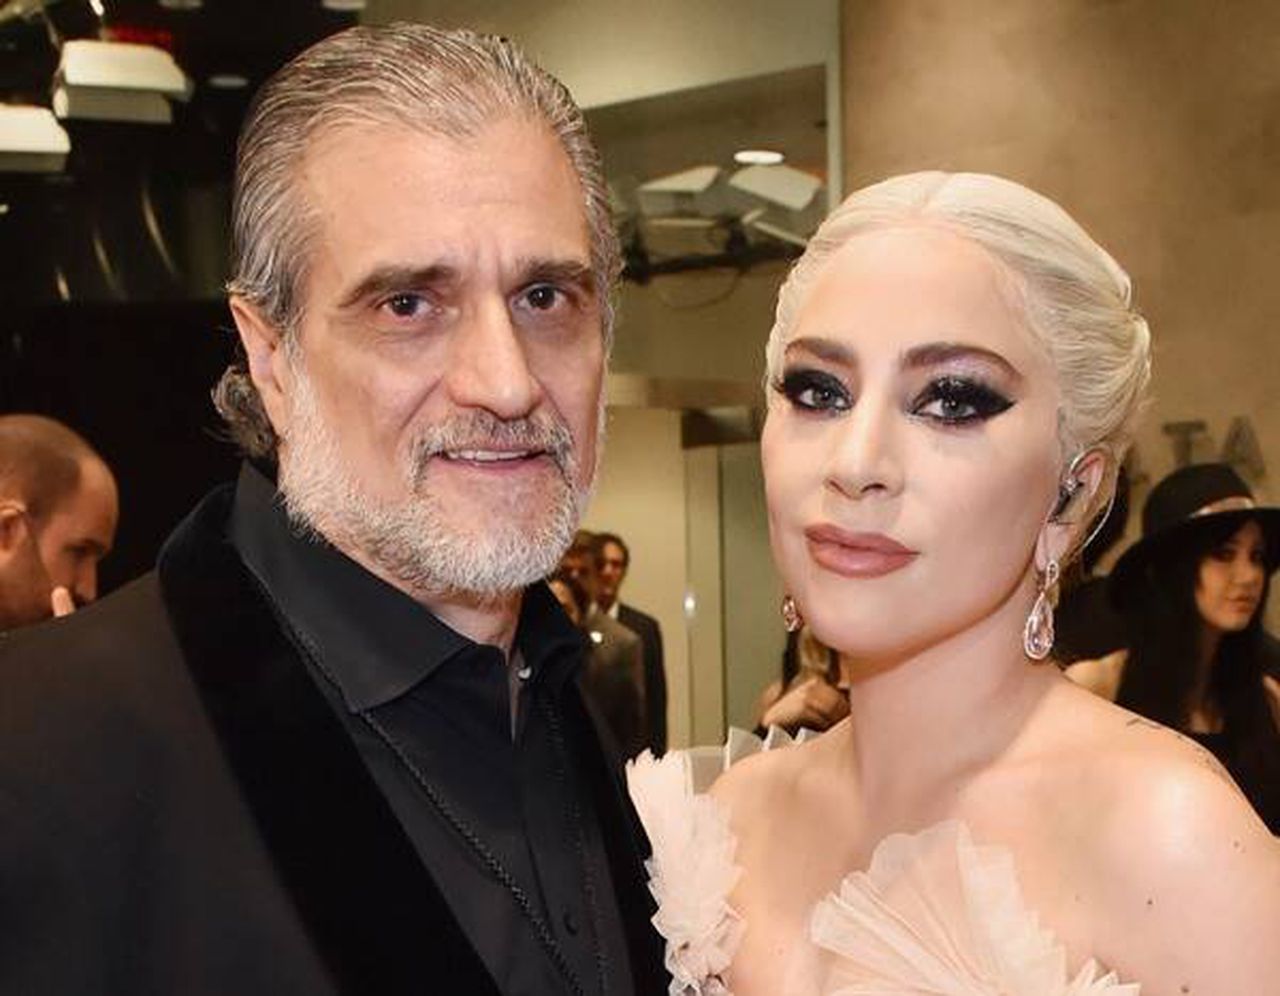 Lady Gaga's Dad Asked for Donations to Help Pay His Furloughed Workers